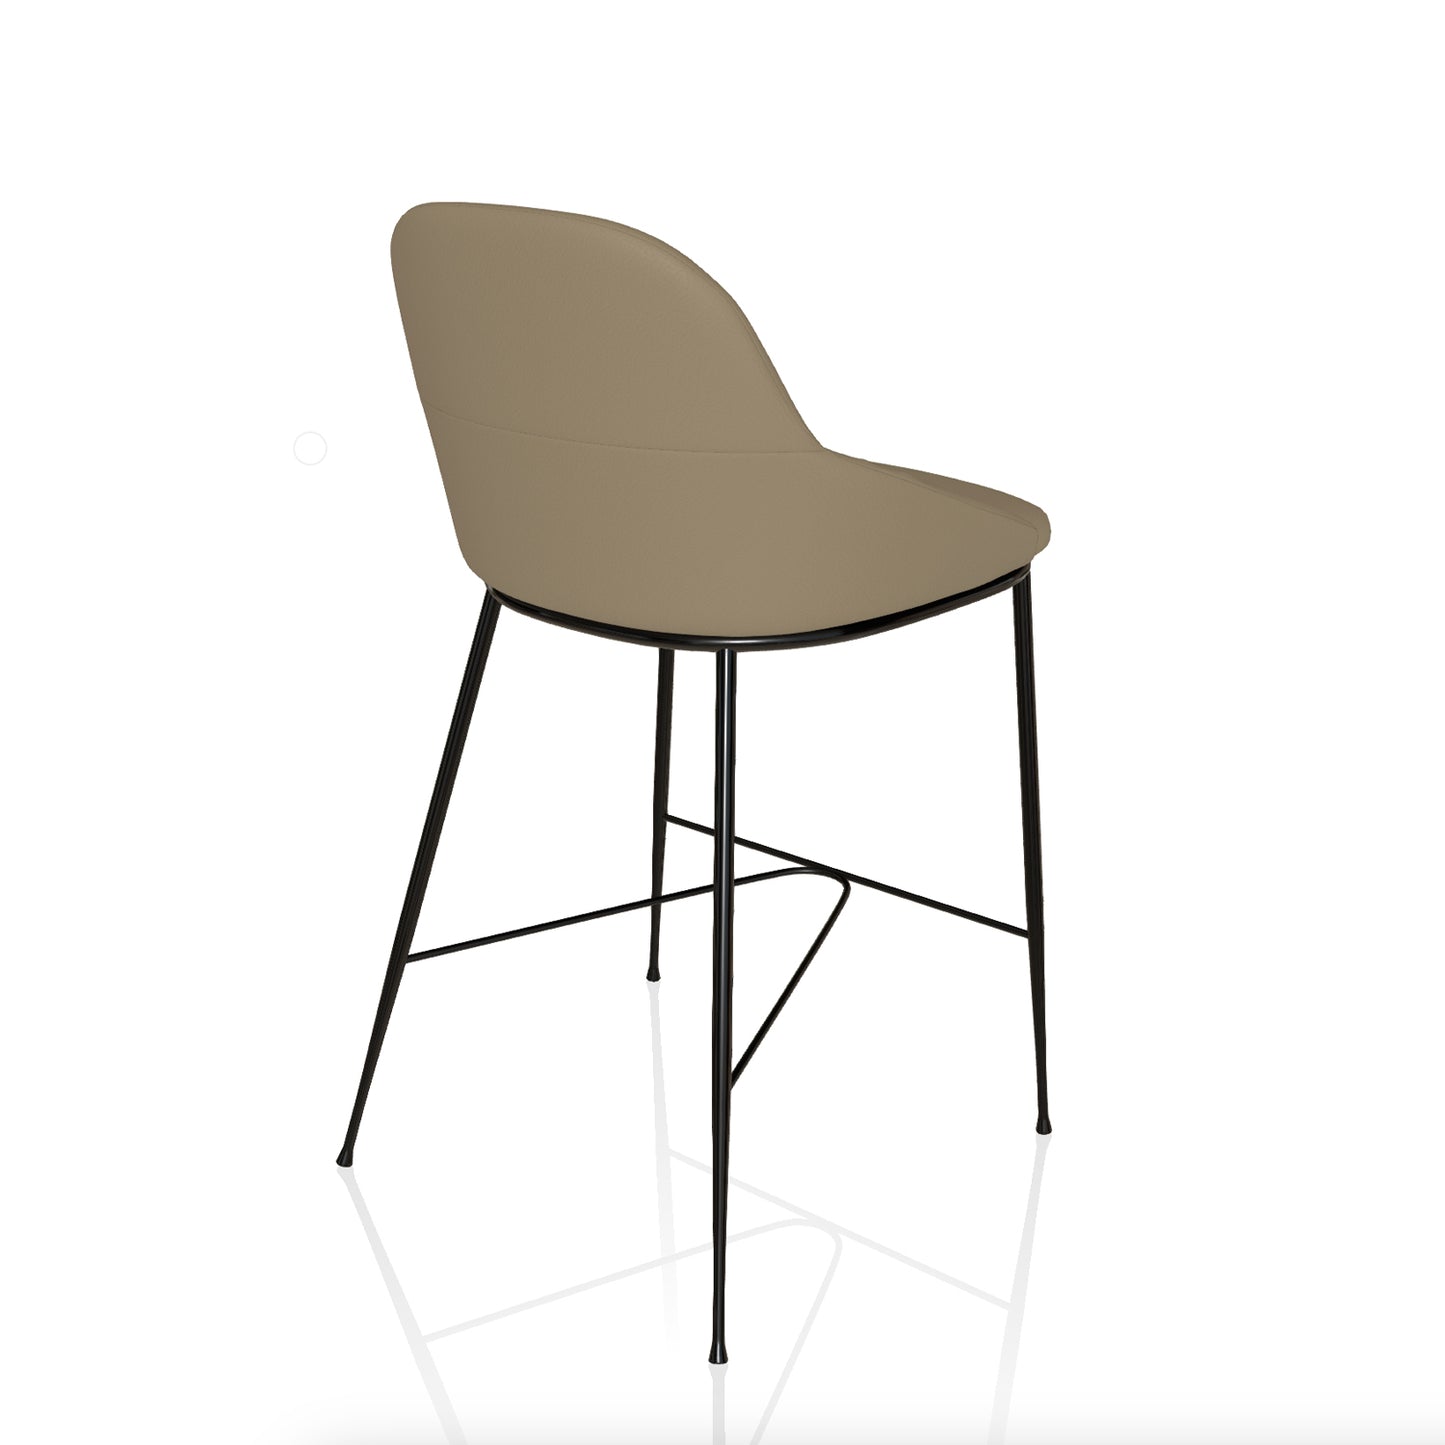 Queen Bar Stool By Bontempi Casa - Glossy Black & Eco Sand Leather